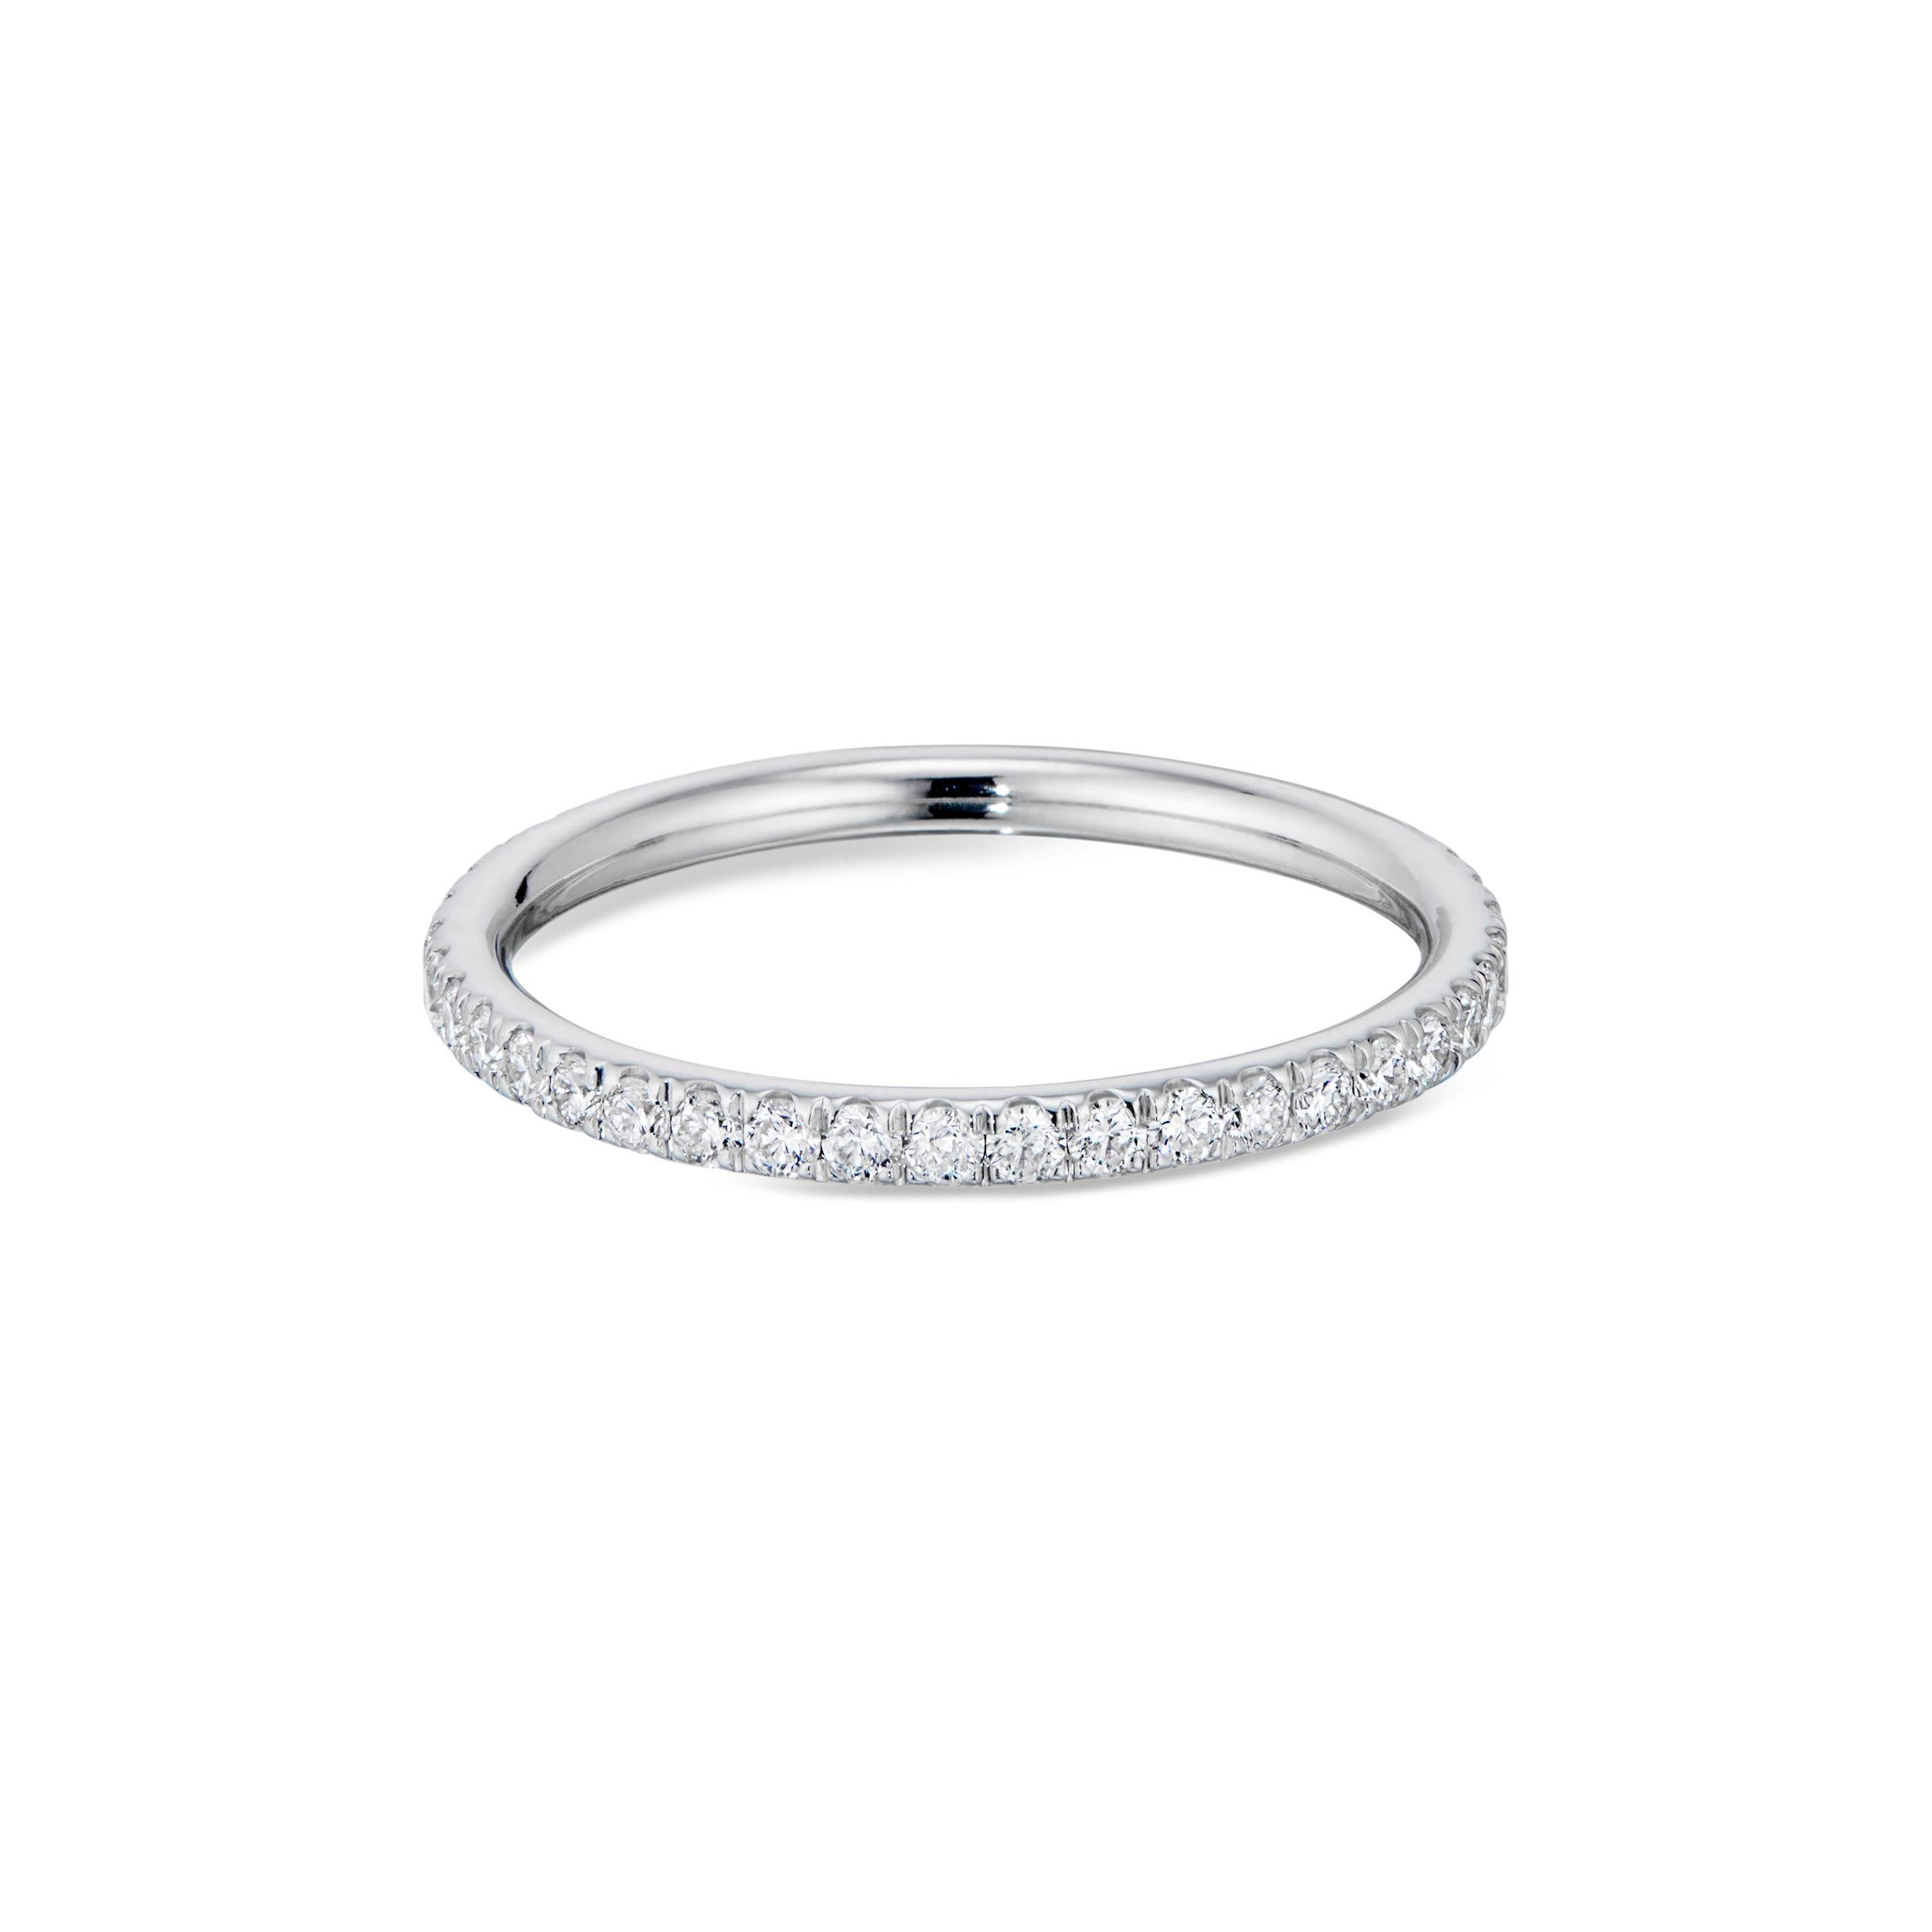 If you’re looking to find the perfect wedding band or simply something to brighten up your ring stack, our Diamond Eternity Band is super versatile. The ring is set with 0.56 carats of round brilliant-cut diamonds and mounted in 18K white gold. It